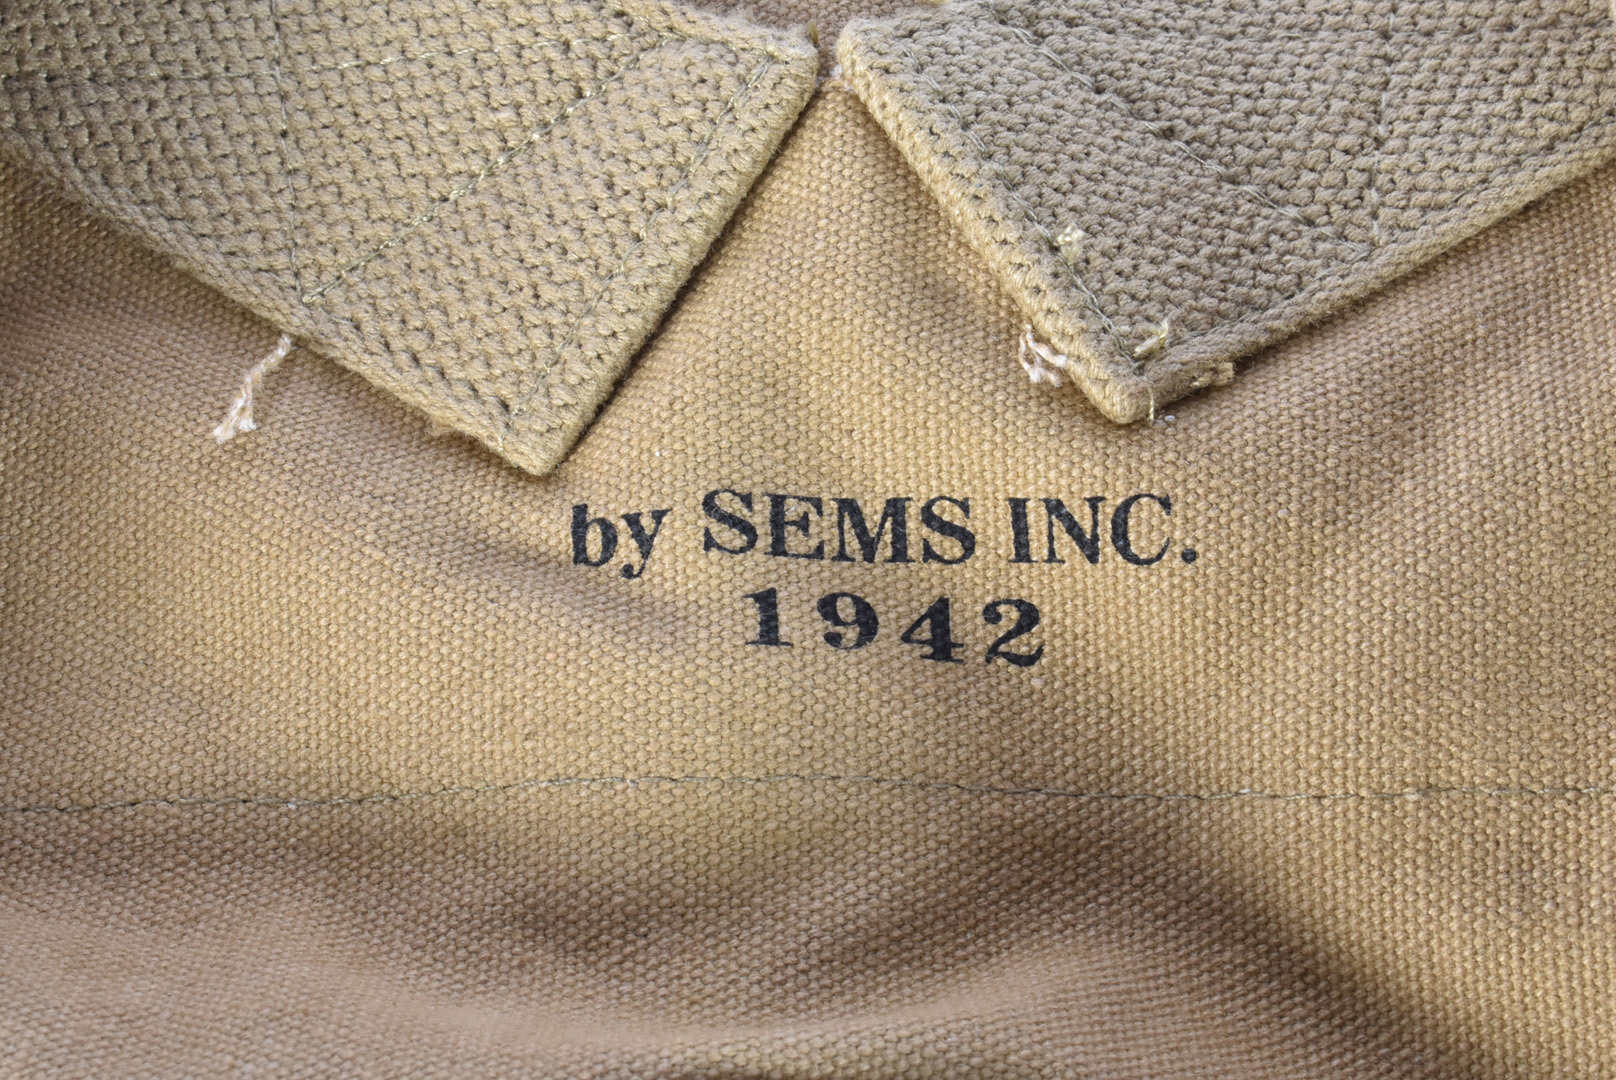 A US Universal Drop bag, stamped Sems Inc 1942, together with a Utility Pouch and a US Musette bag - Image 10 of 12